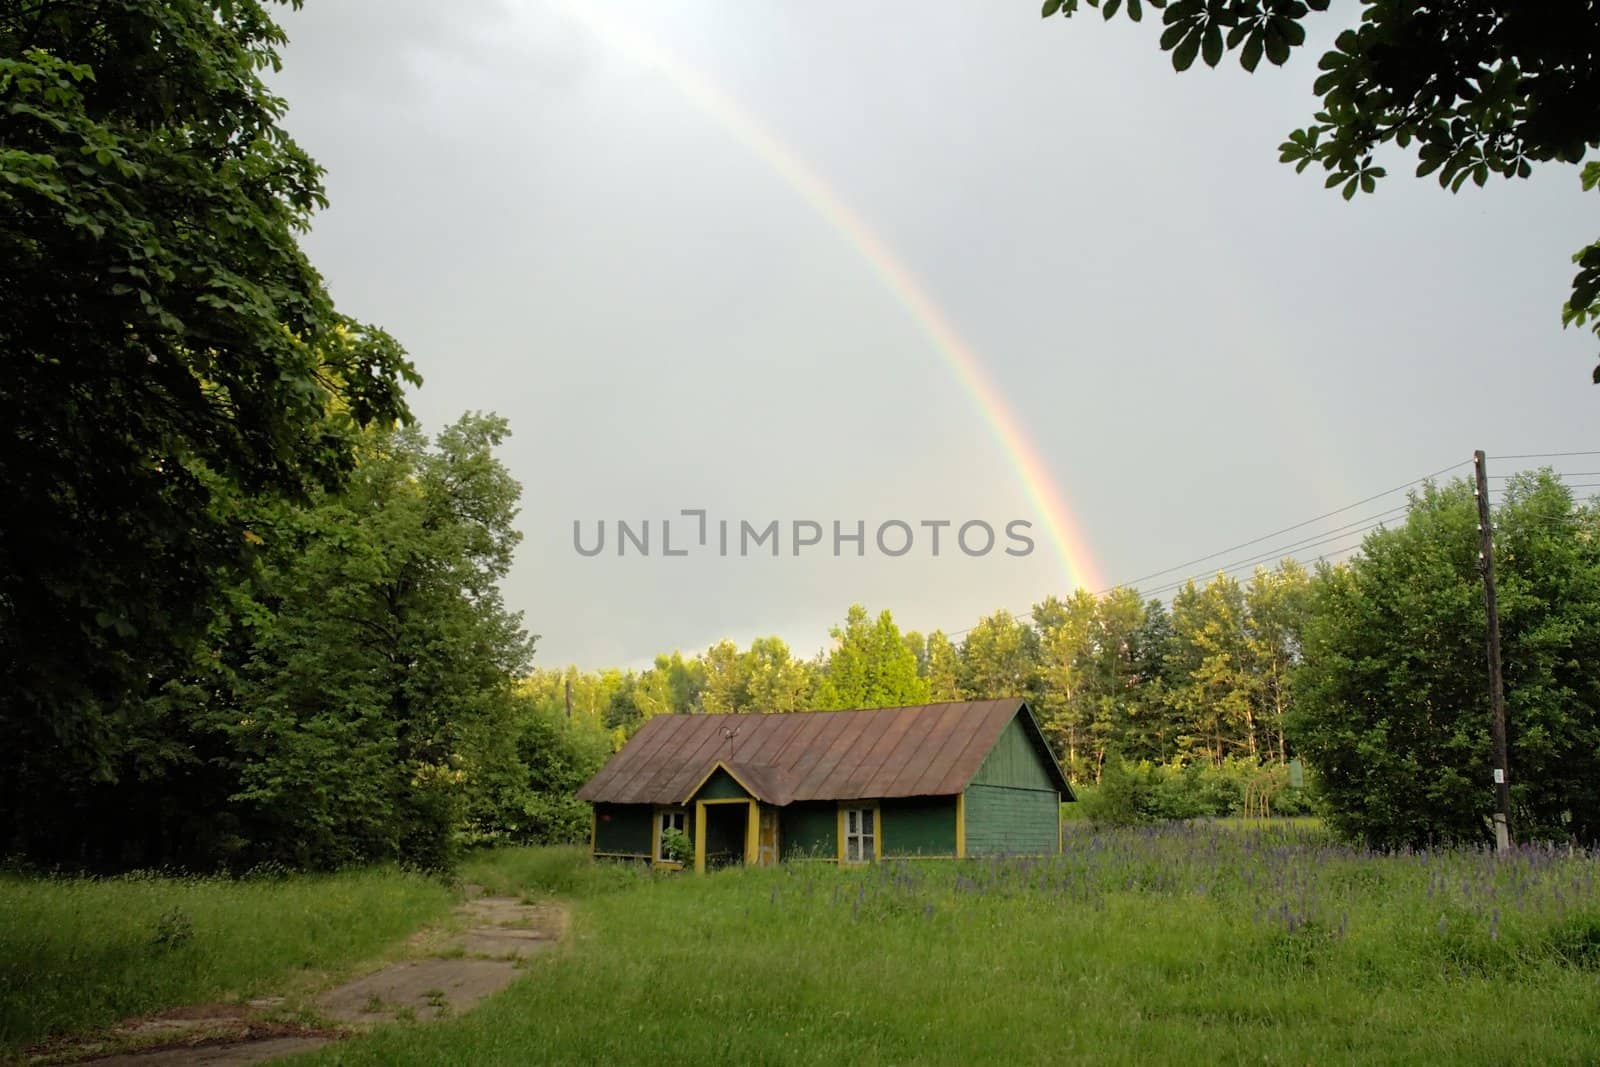 Rainbow after rain above the old house in a forest